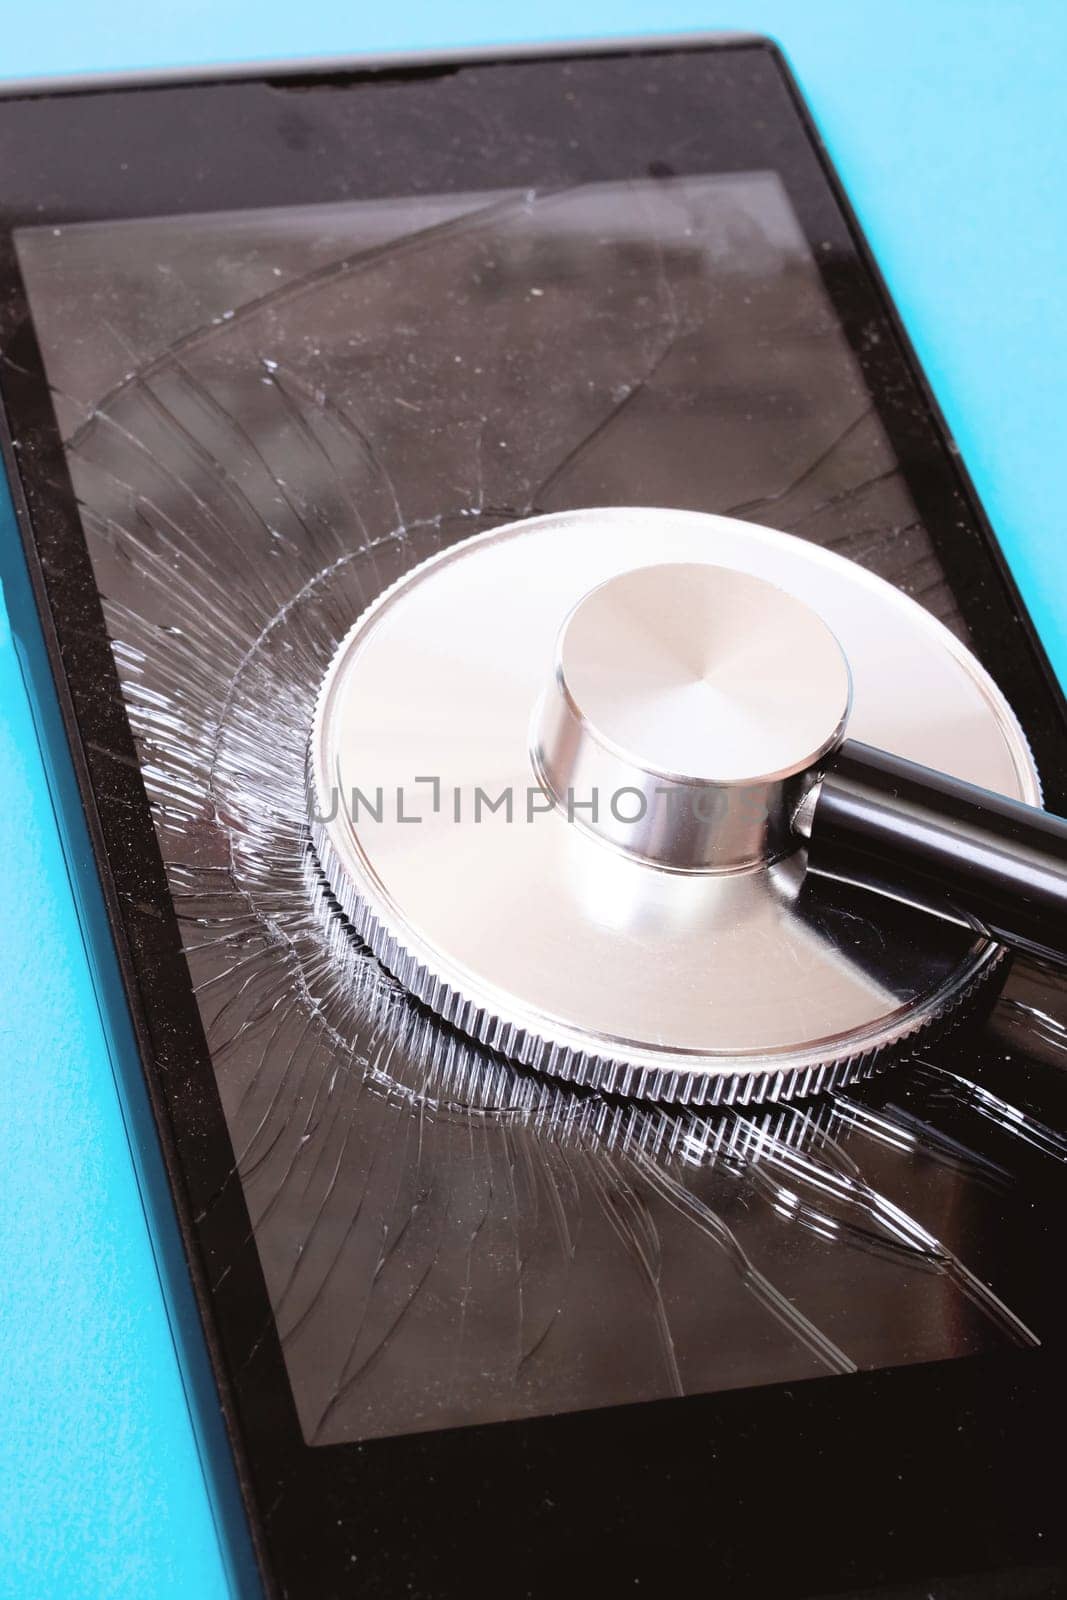 Stethoscope on a broken phone display on blue background by Vera1703